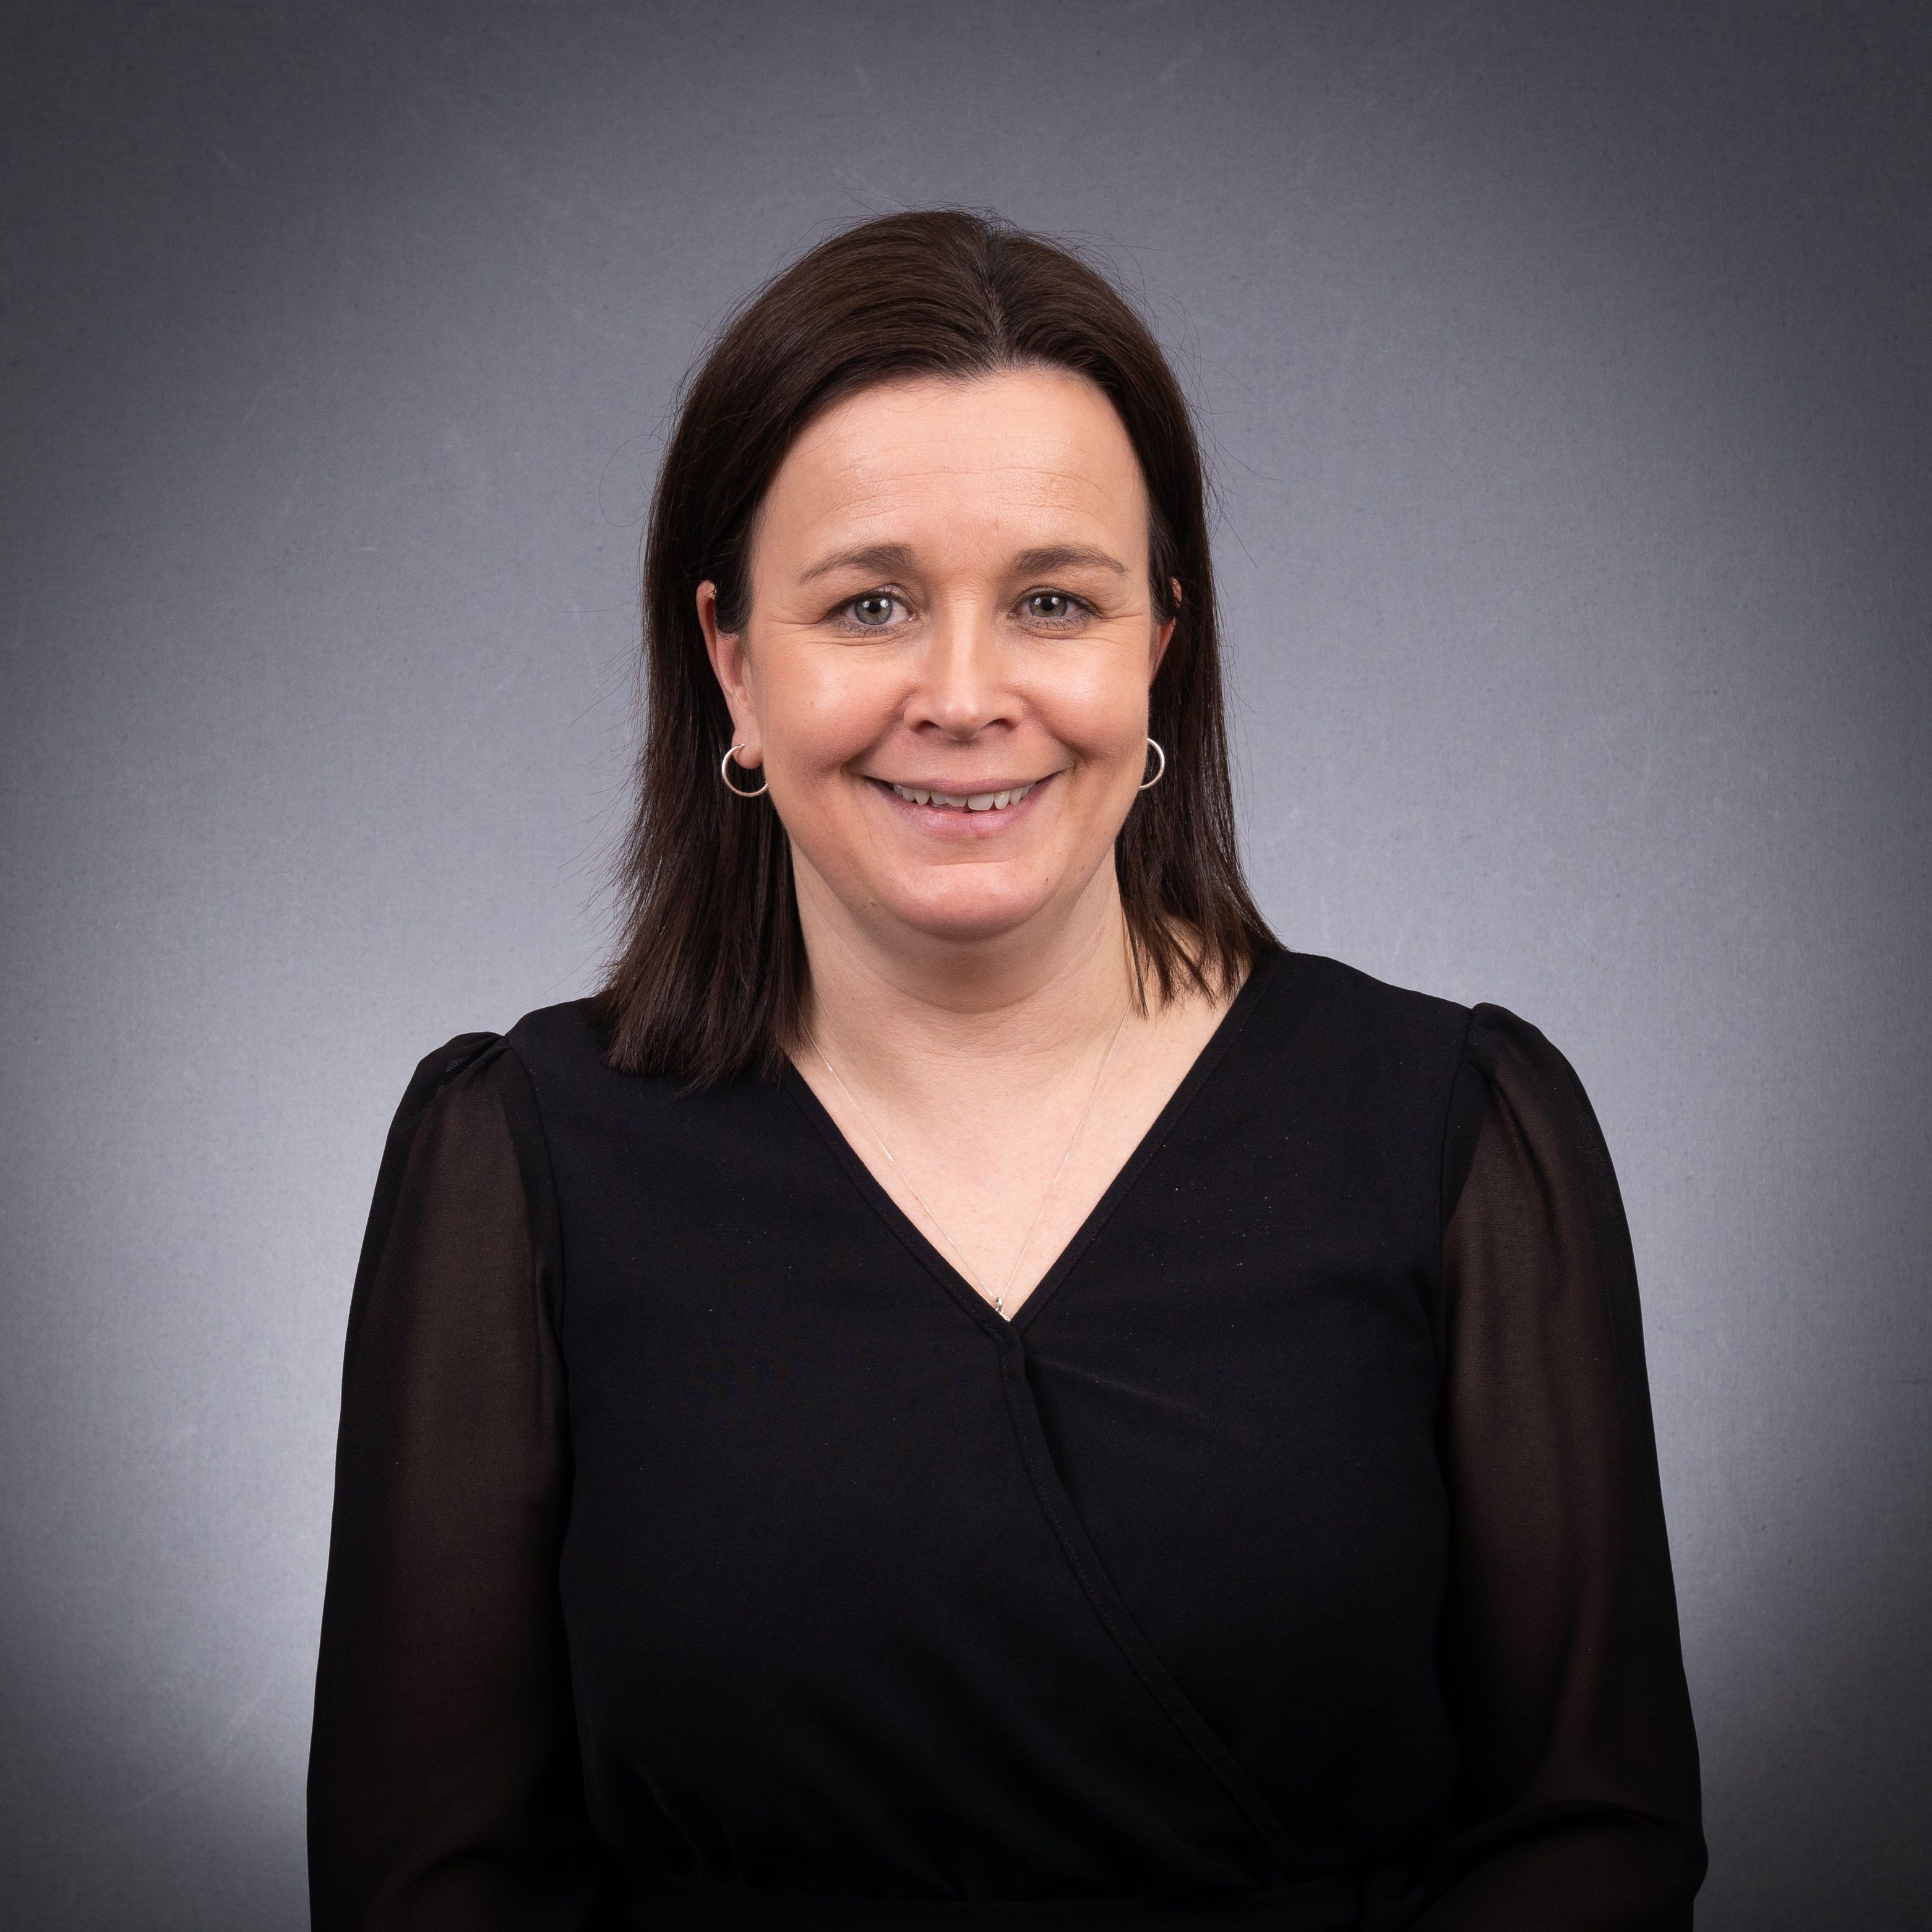 Louise Mulholland, Head of Commercial Operations